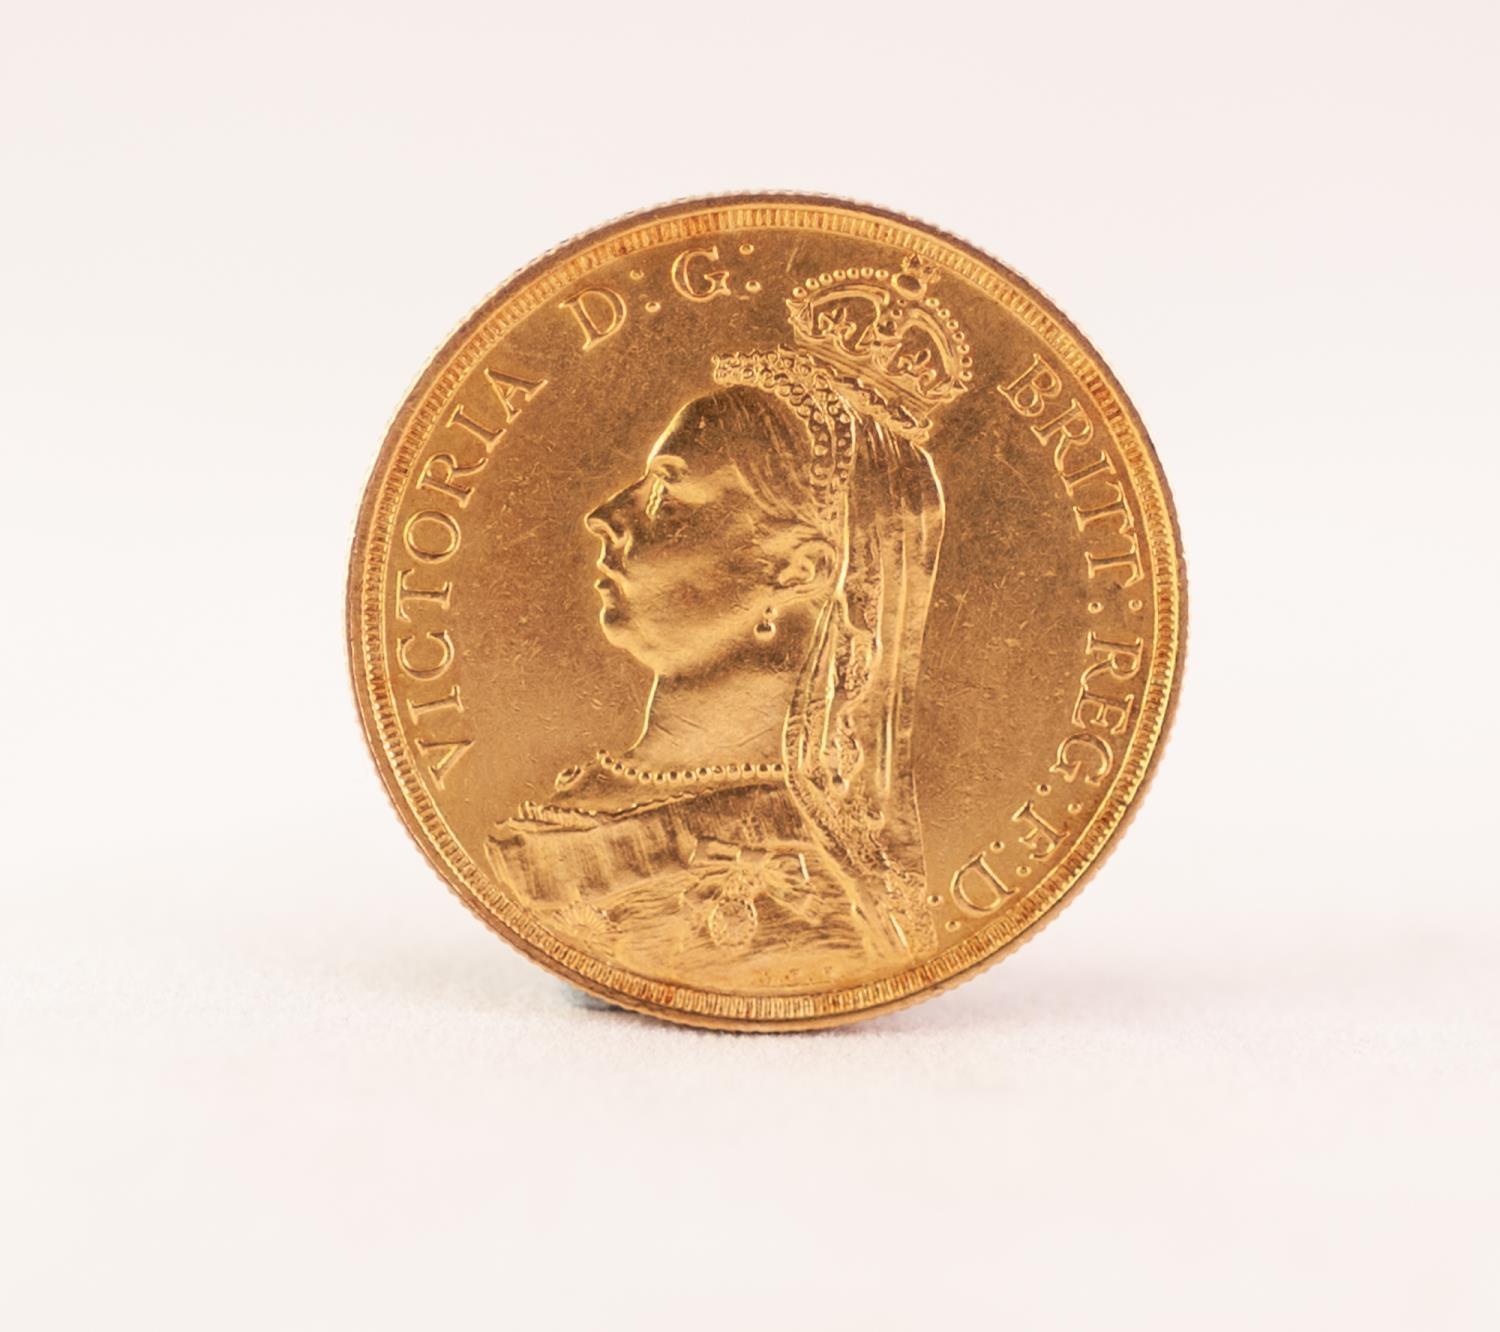 VICTORIAN £2 GOLD COIN, 1887 (VF), 16gms - Image 2 of 2